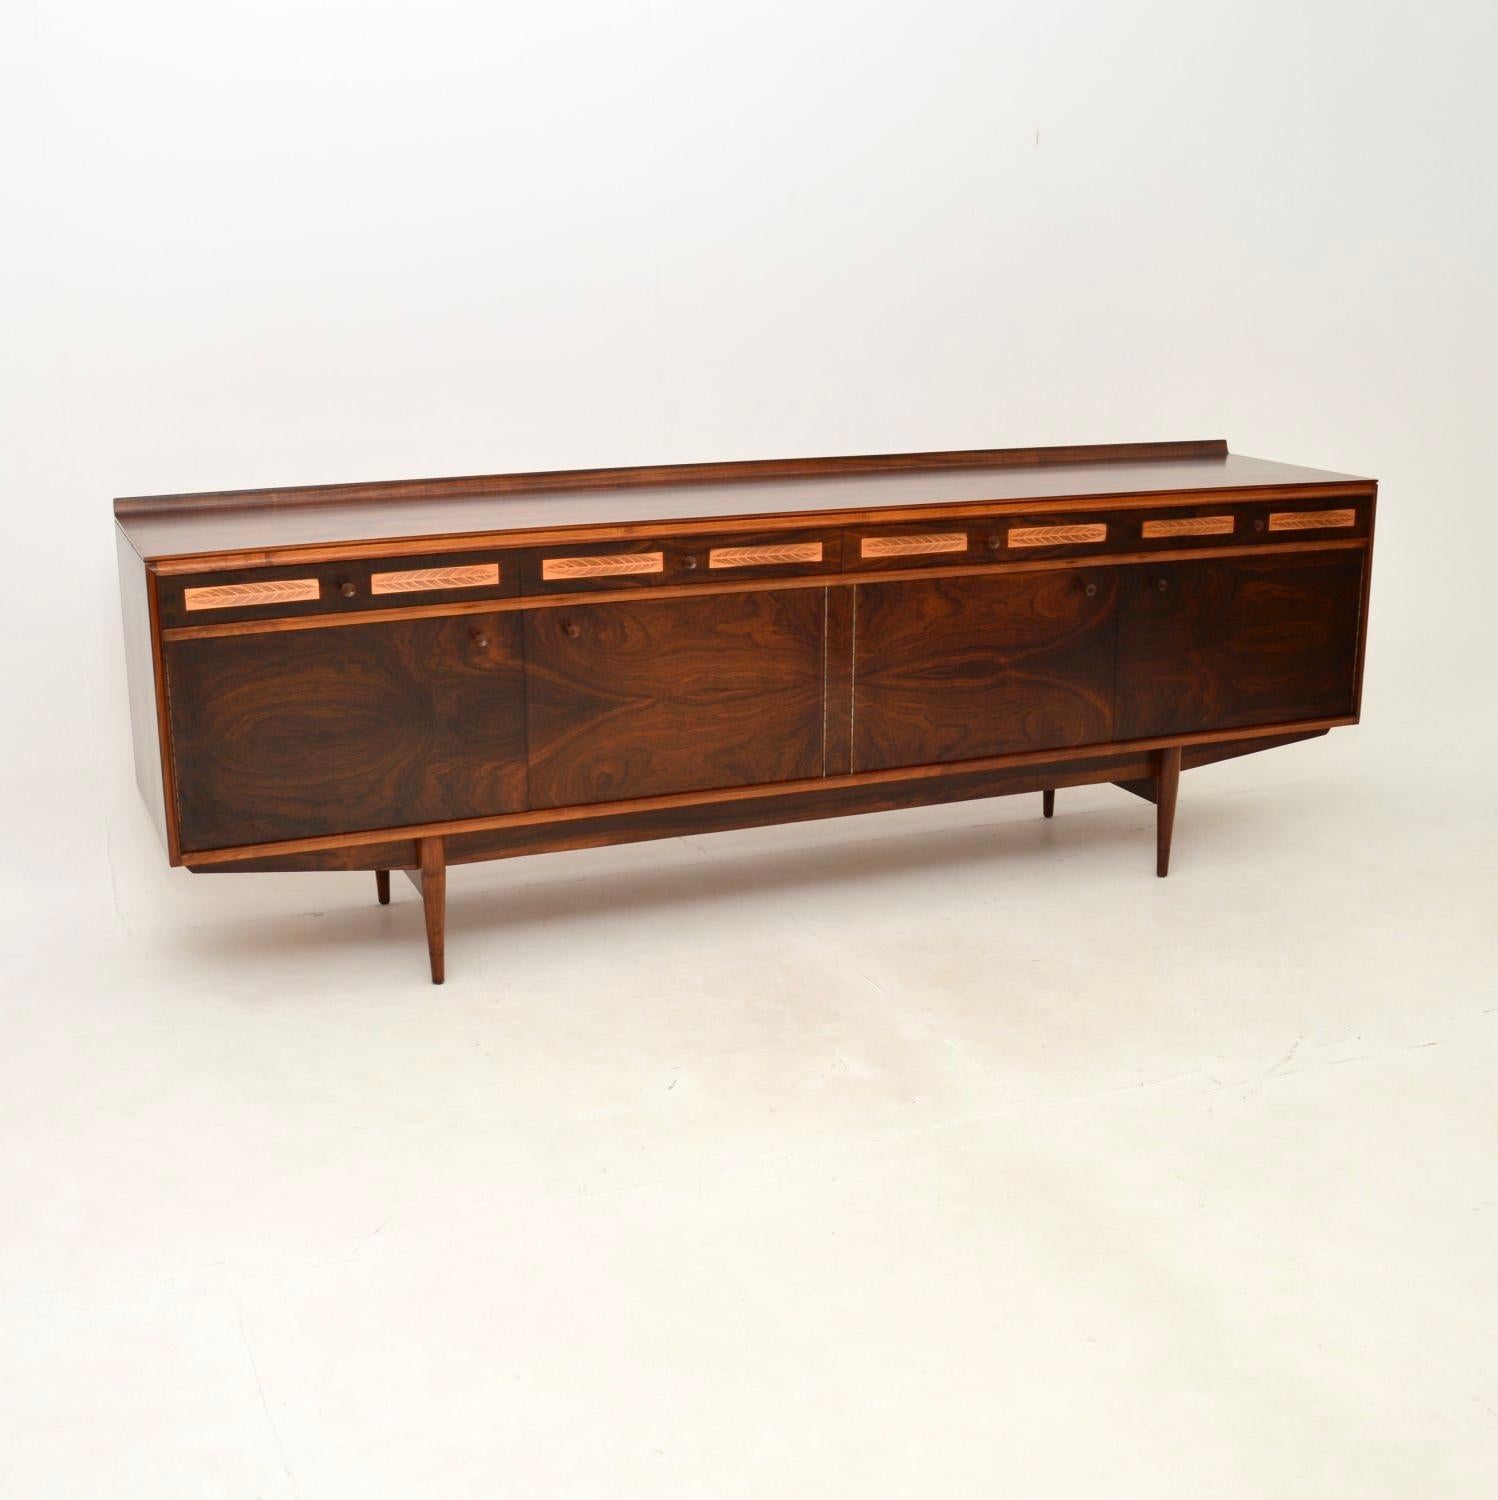 An exceptional vintage sideboard by Robert Heritage for Archie Shine. This was made in London, it dates from the 1960’s.

This was part of the “Berkshire” range, distinctive for the copper inlays on the top drawers depicting feather motifs. The